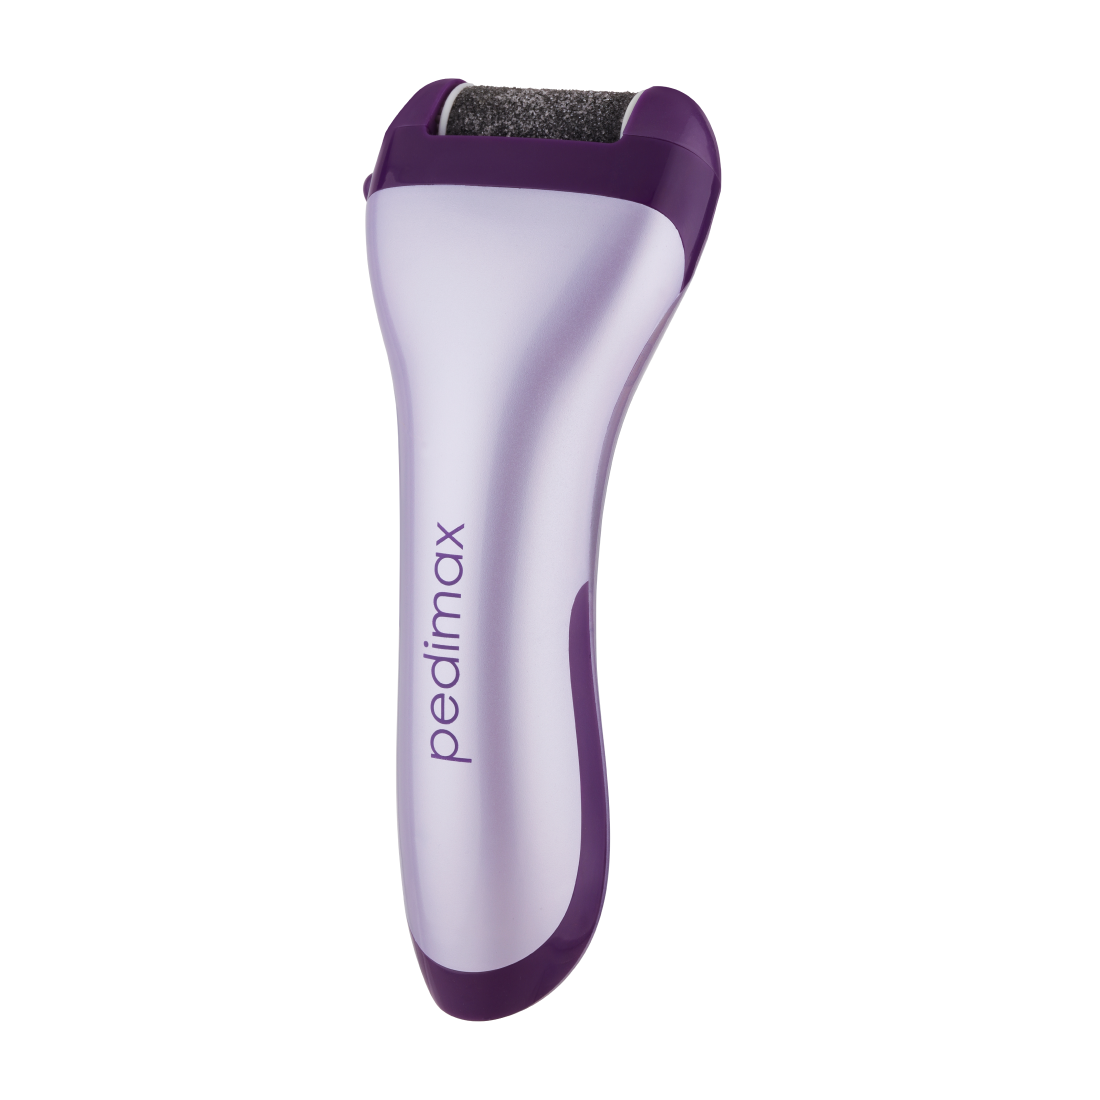 With the Glow All Day from Michael Todd Beauty, this pedicure device features a purple and white design.